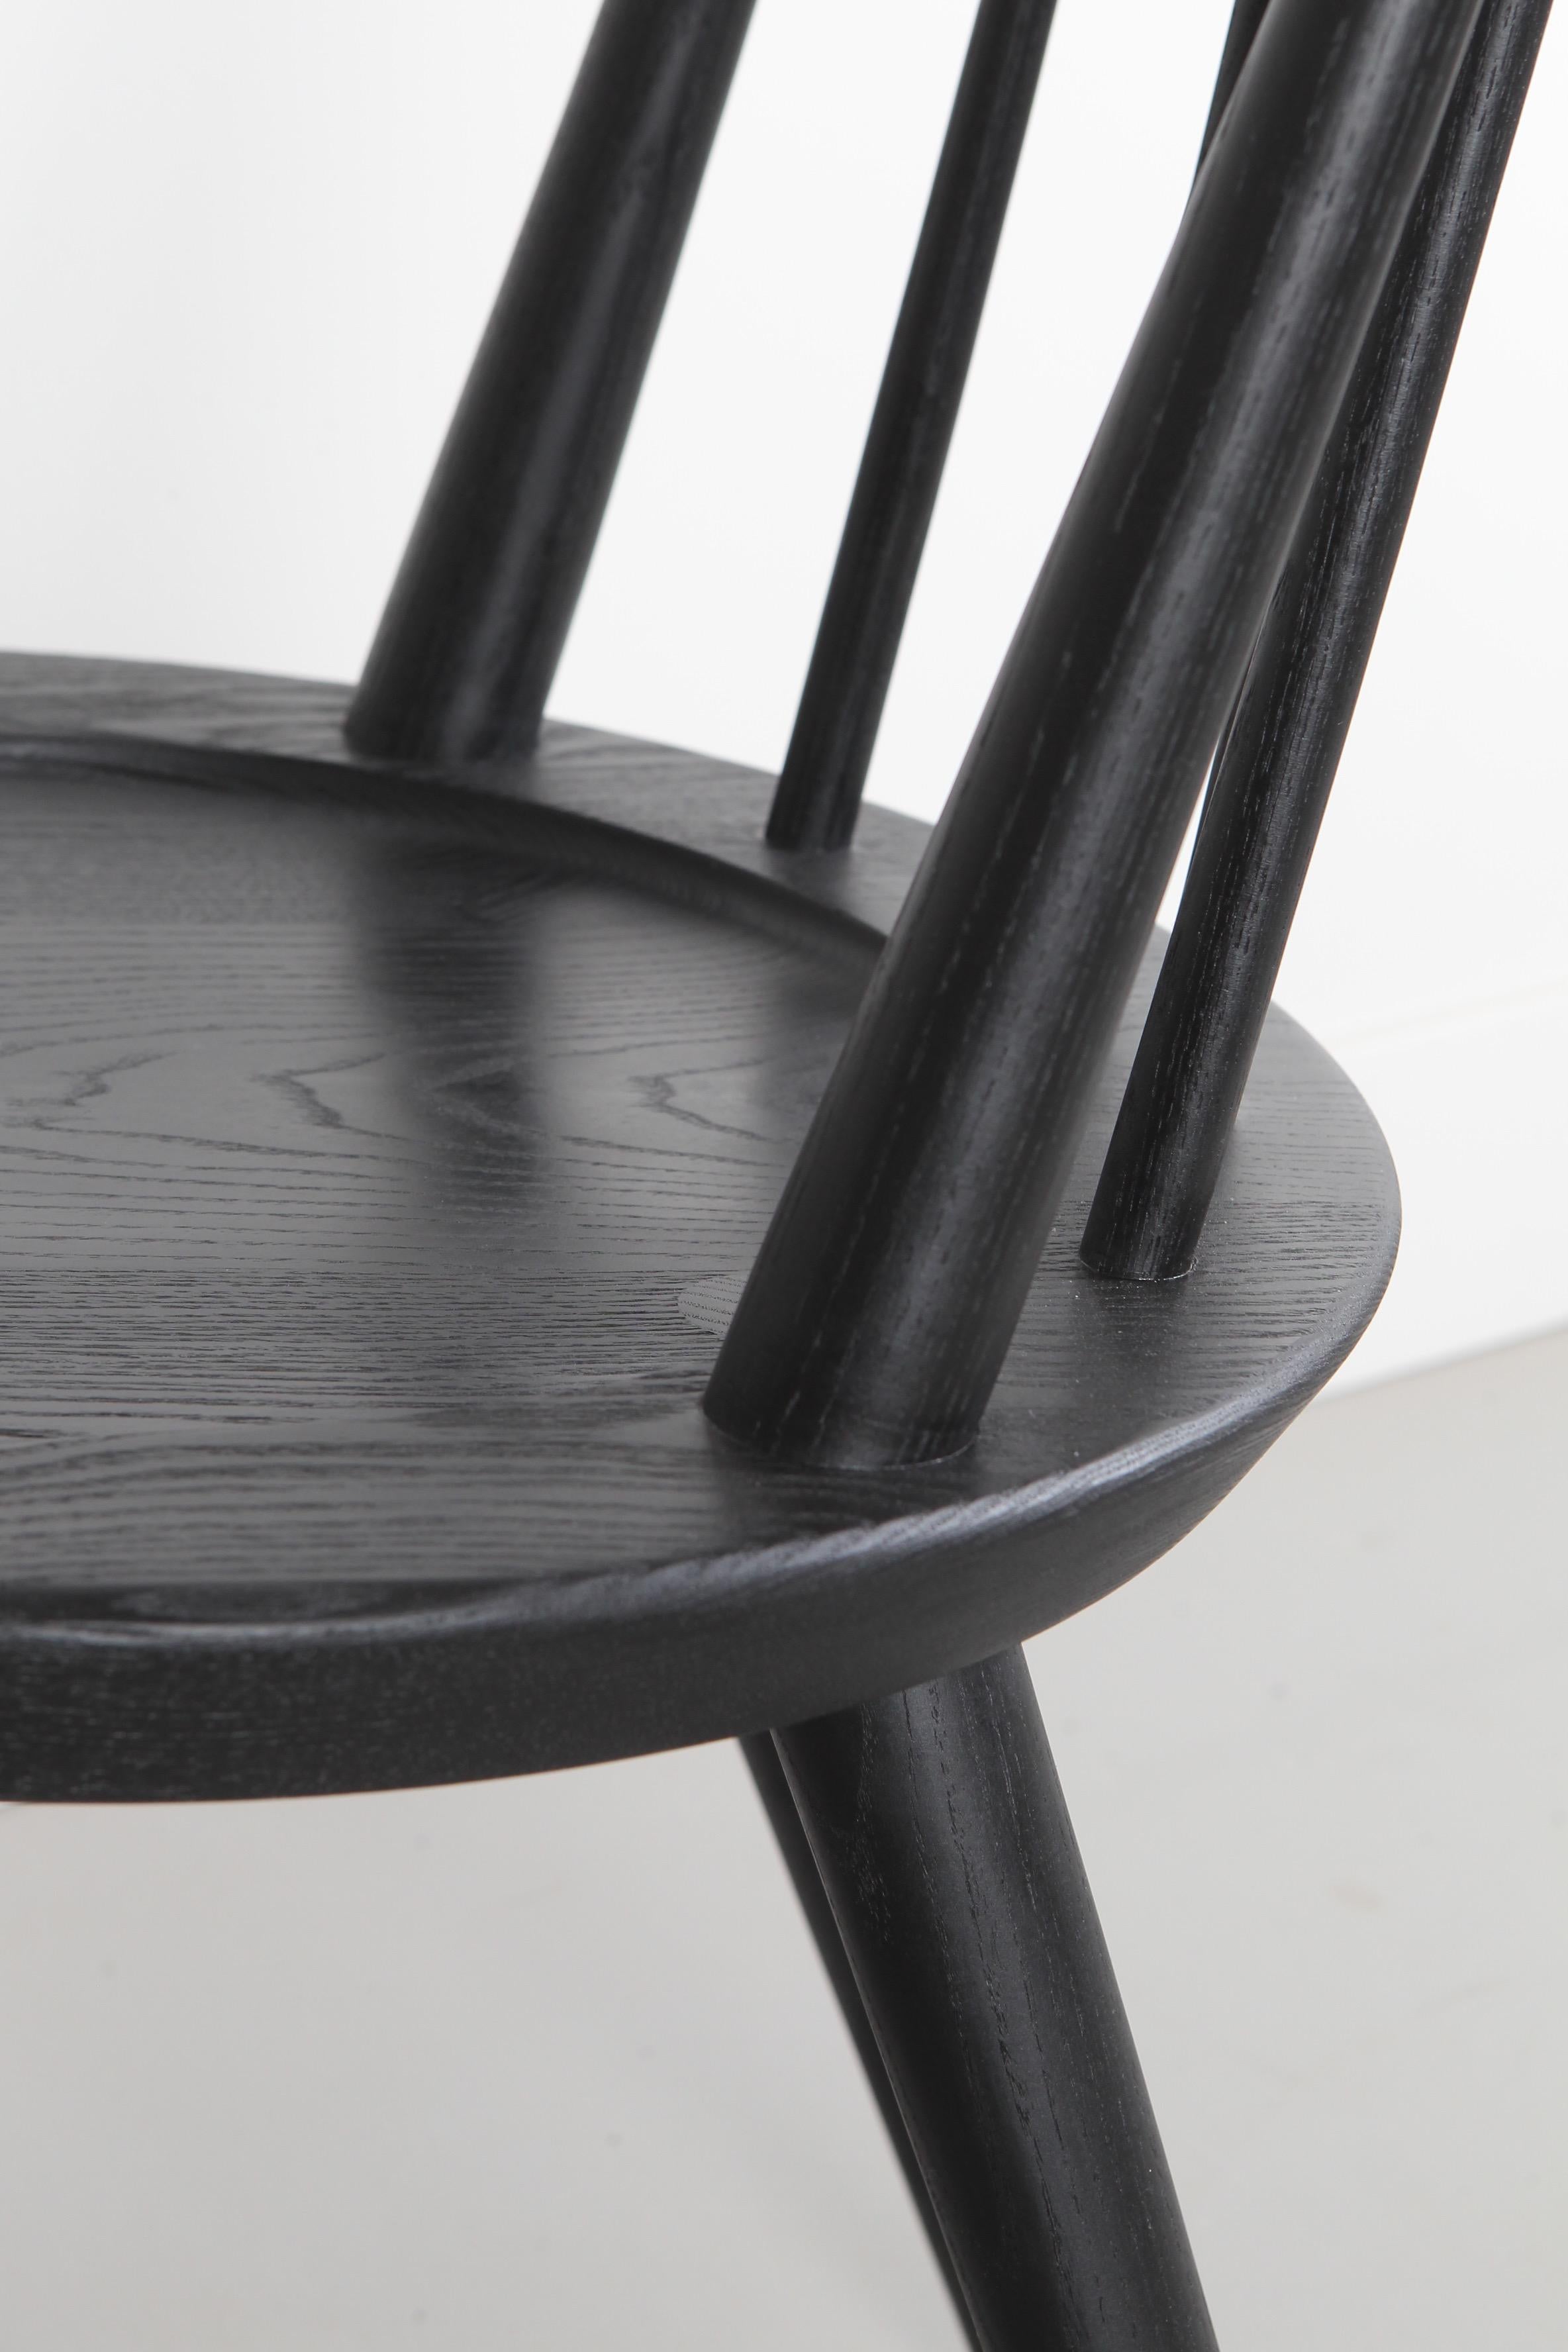 The Vände chair is a contemporary take on the Classic Windsor chair. Hand-turned spindles feature wedged, mortice and tenon joinery for strength and aesthetic appeal.

The round seat has been sculpted for comfort. The backrest is both supportive